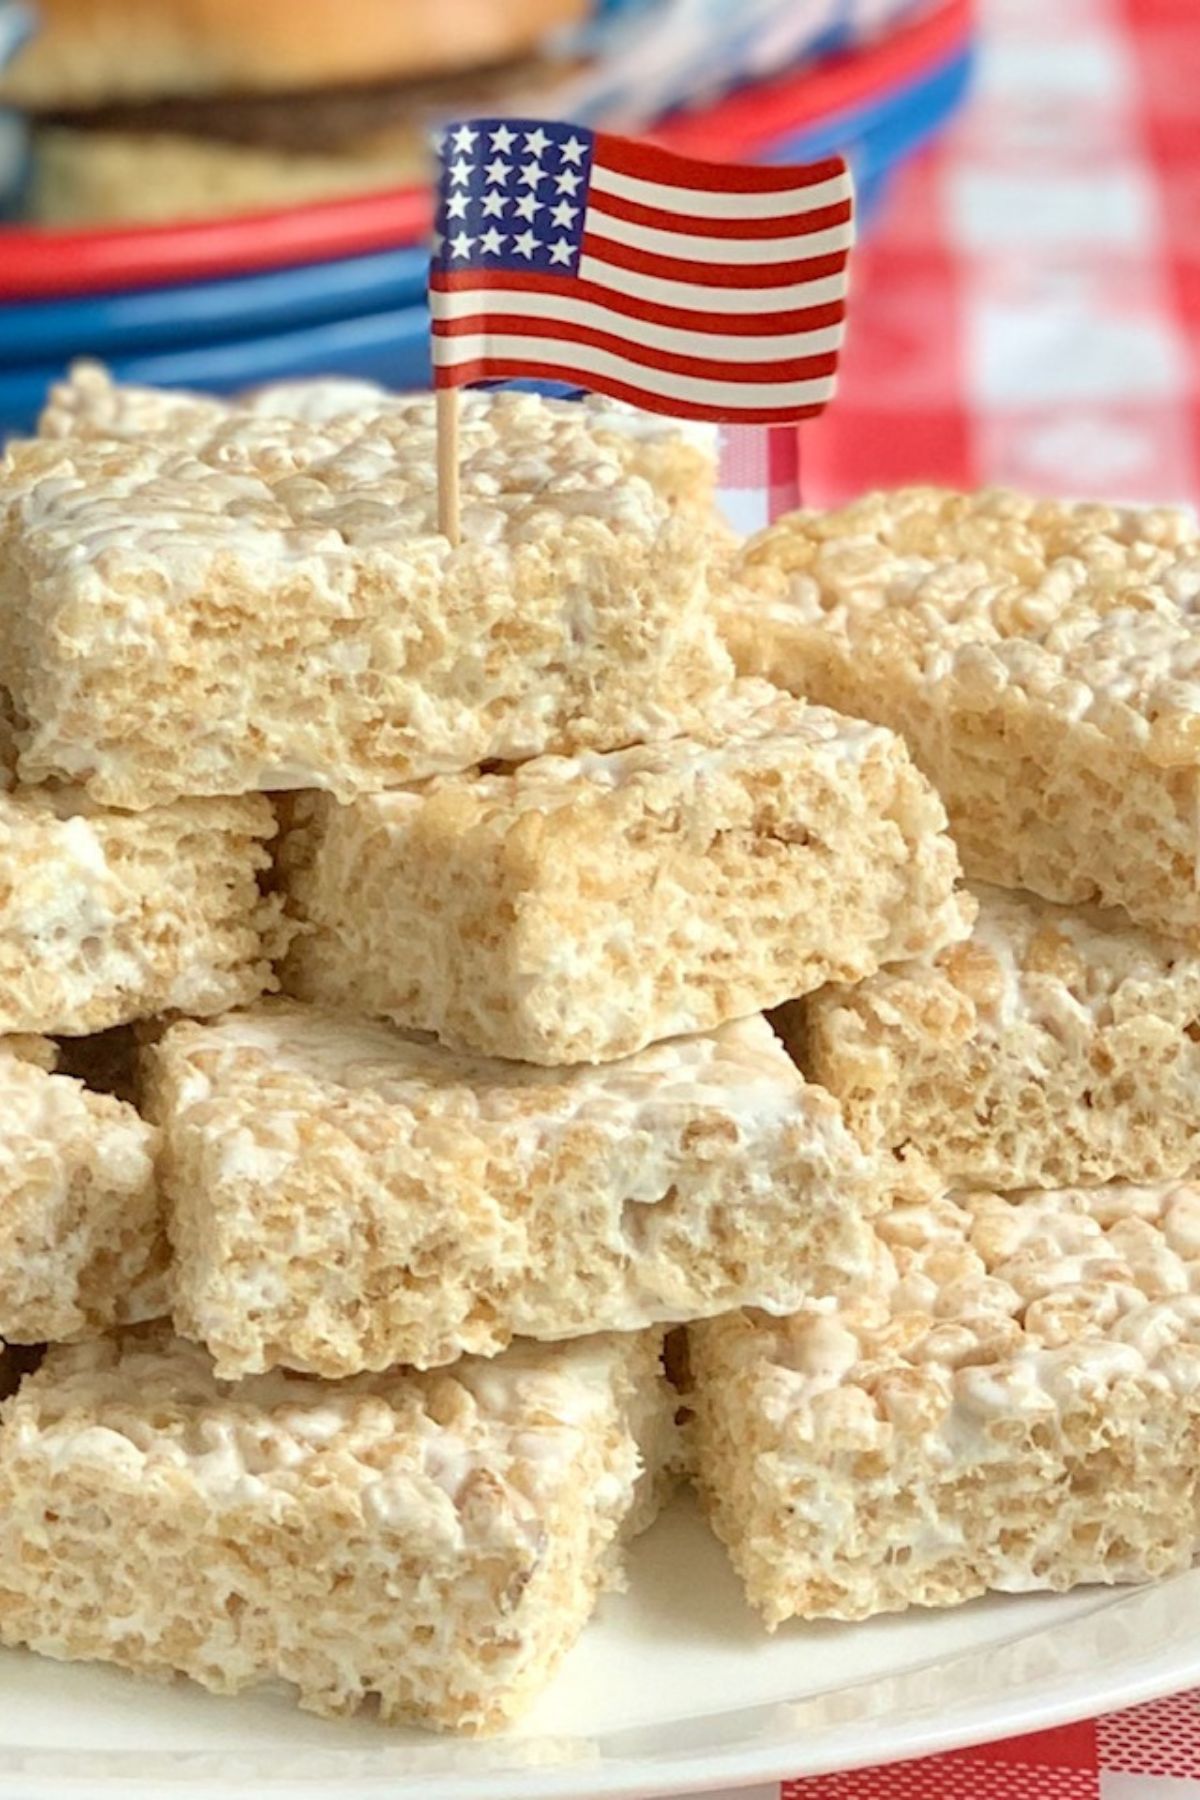 A plate full of allergen friendly peanut free, gluten free and dairy free homemade rice krispie treats.